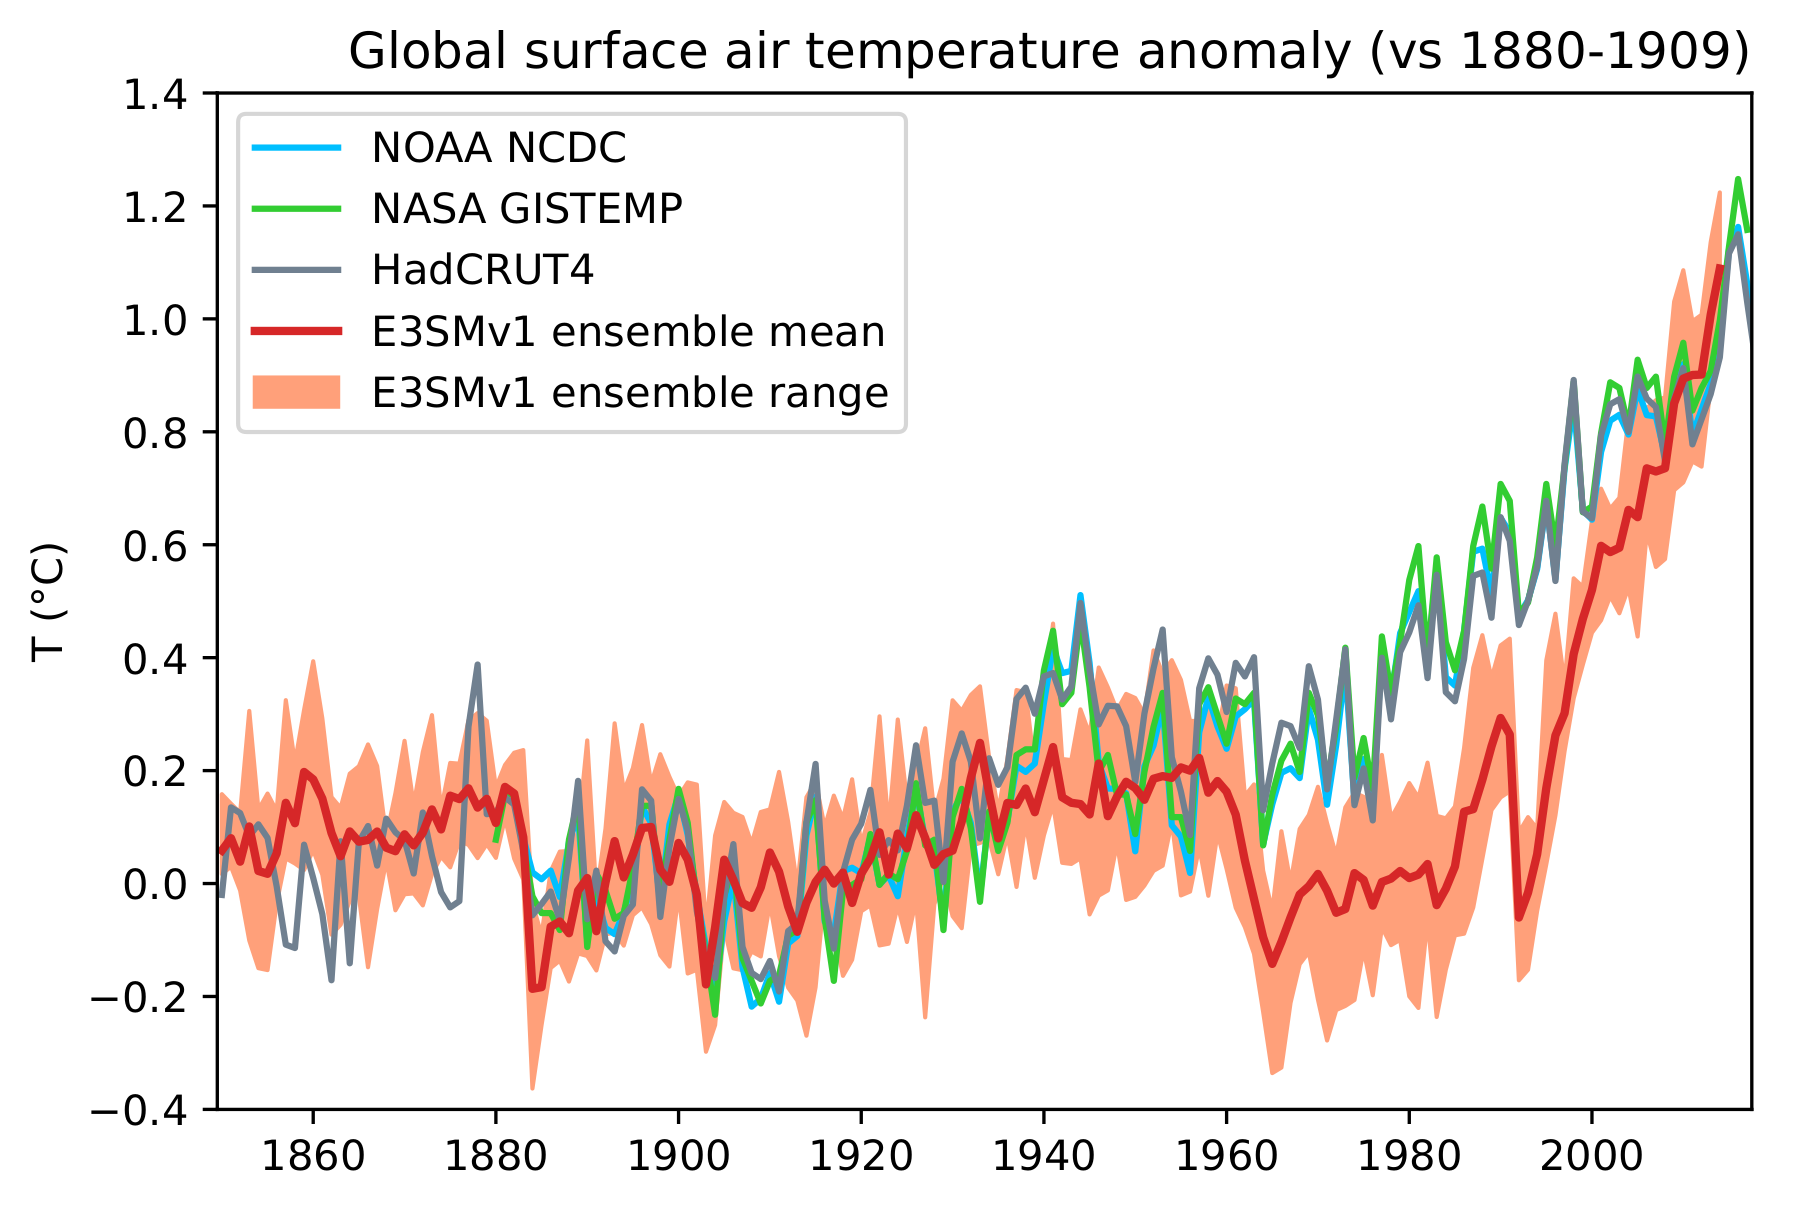 Time evolution of annual global mean surface air temperature anomalies